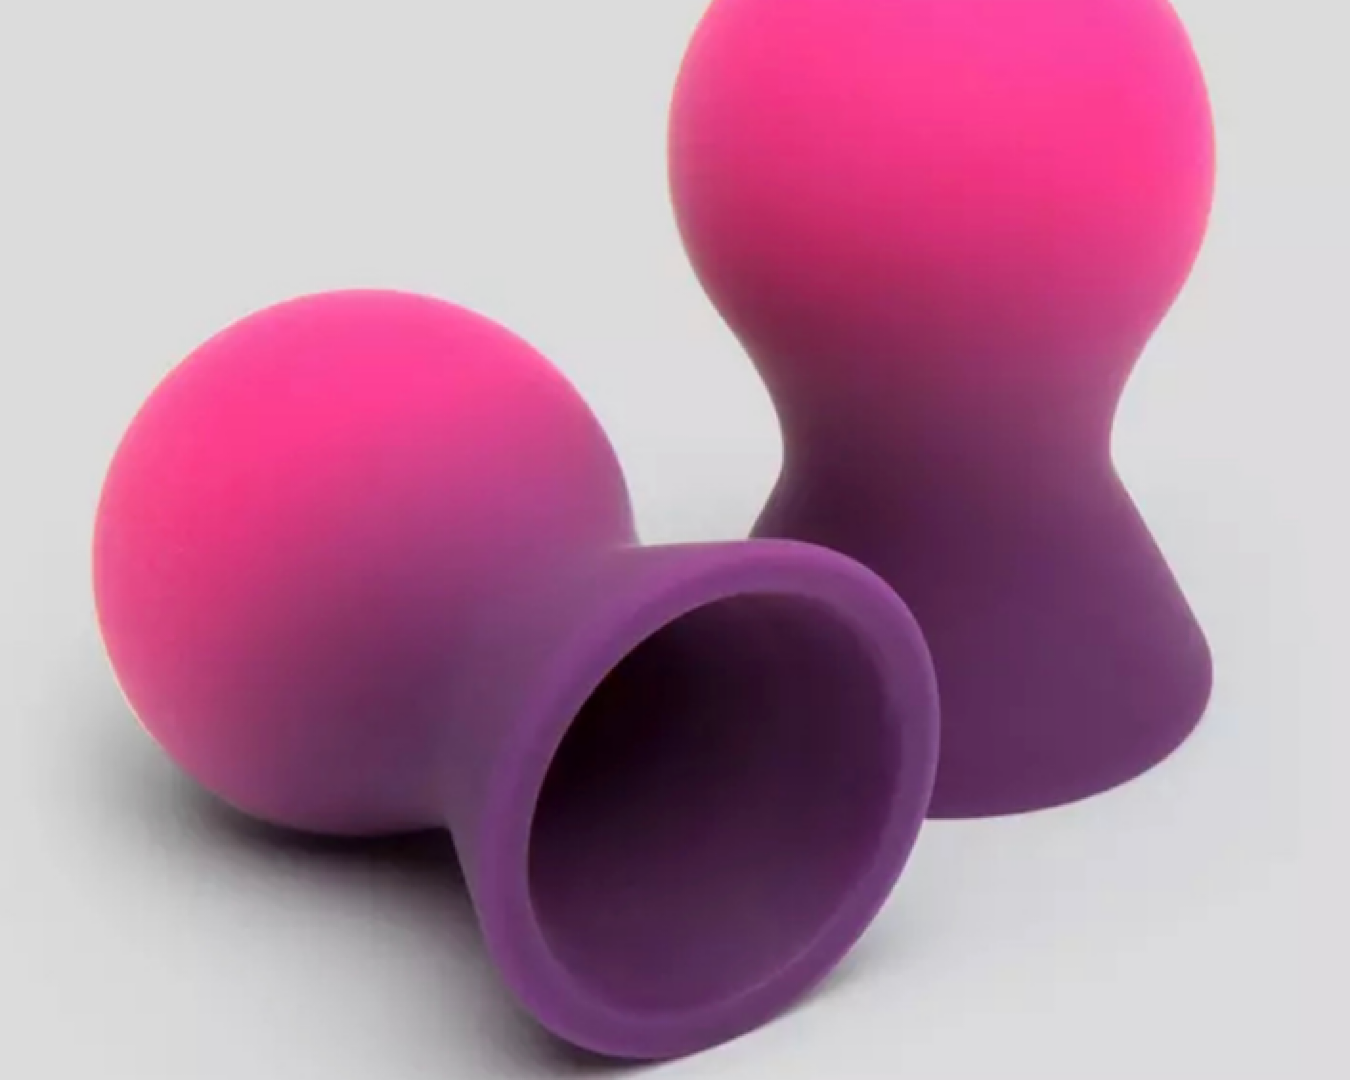 Semi-lightbulb-shaped two-tone silicone nipple suckers in pink and purple. 